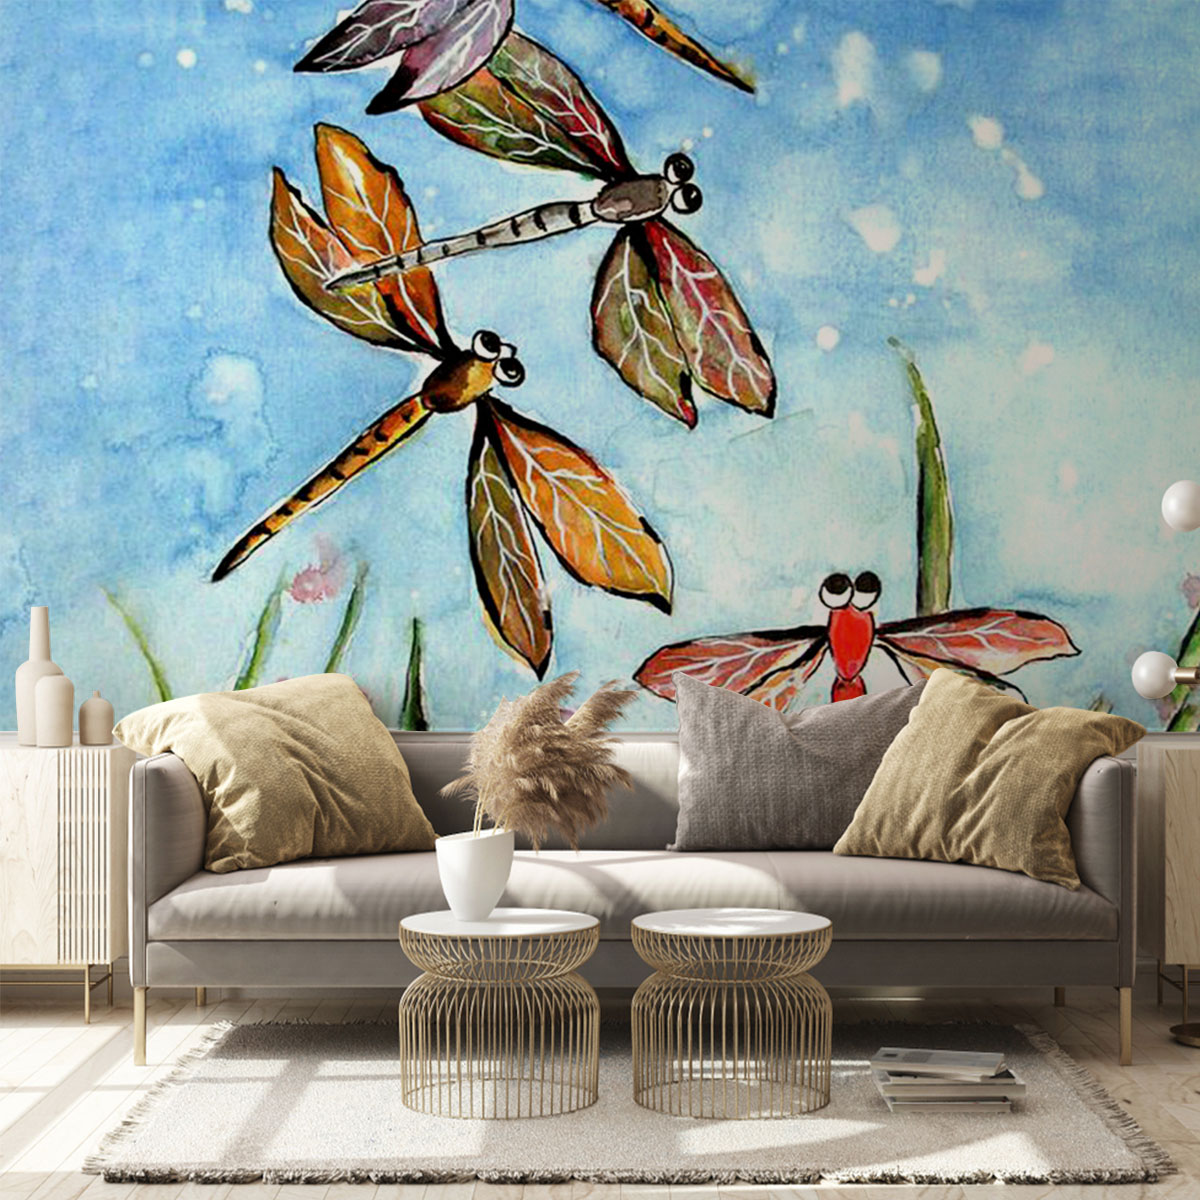 Water Color Dragonfly Wall Mural